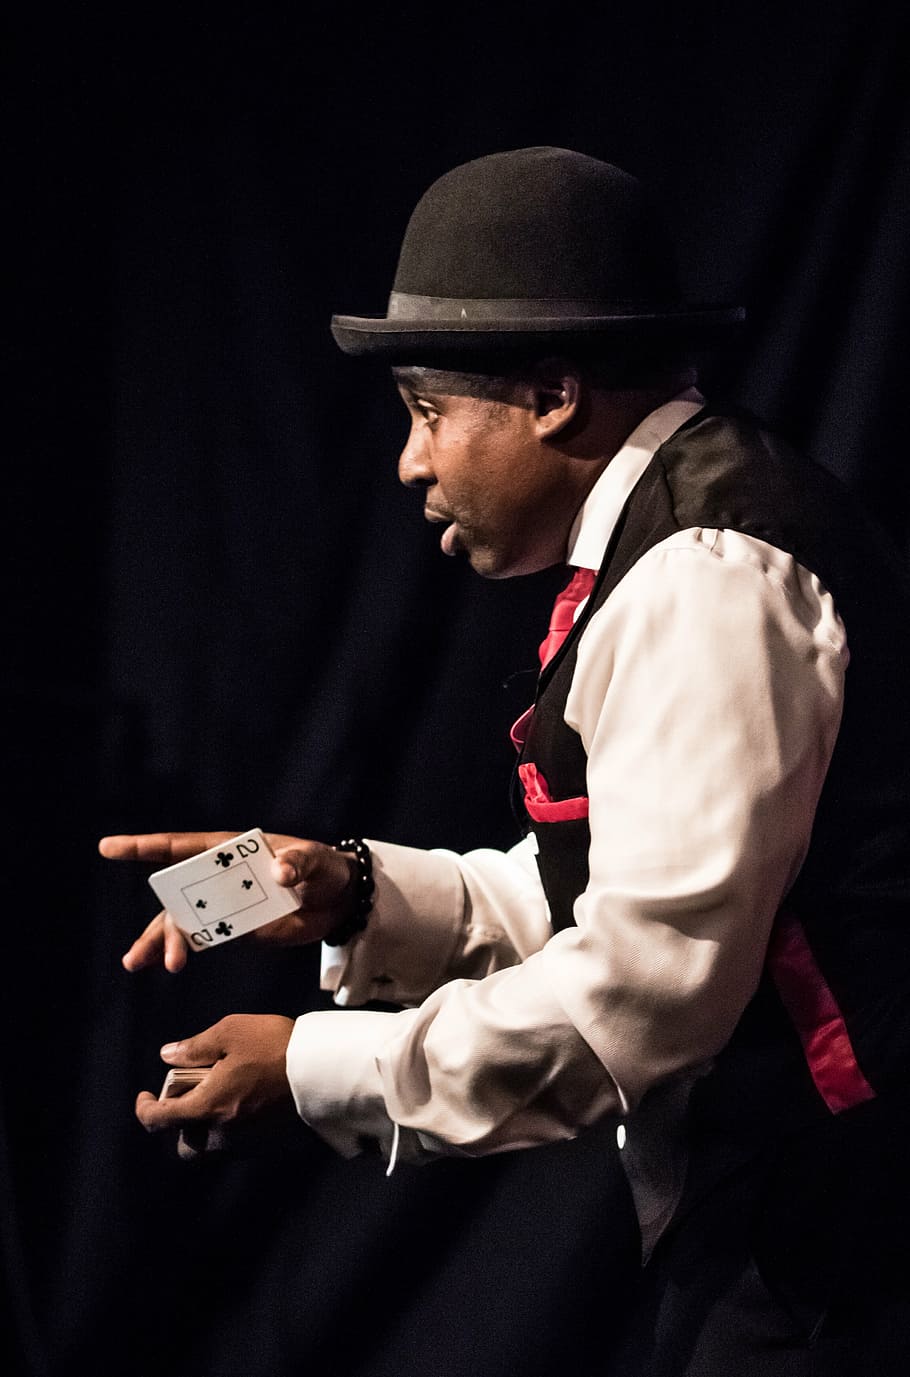 A card magician demonstrating a card trick.